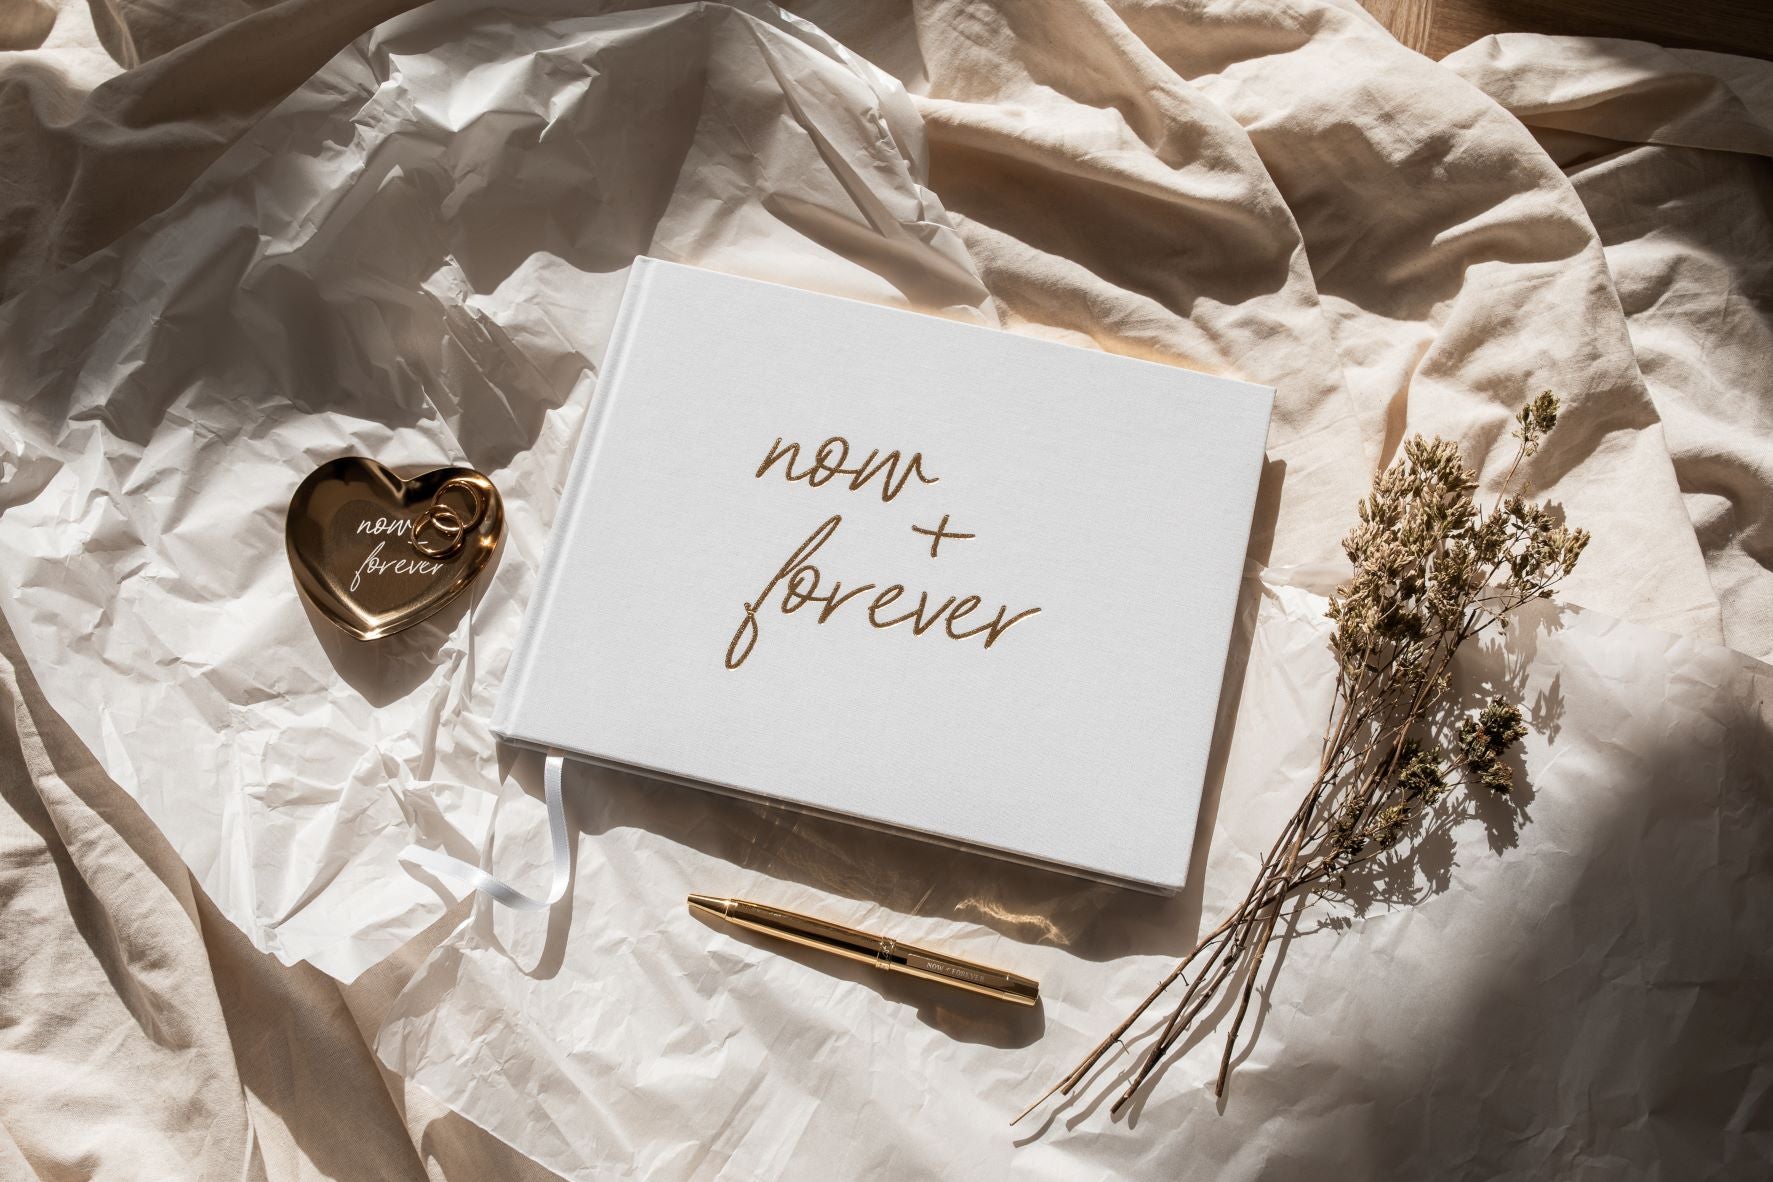 Passion Set 5 - "now + forever"